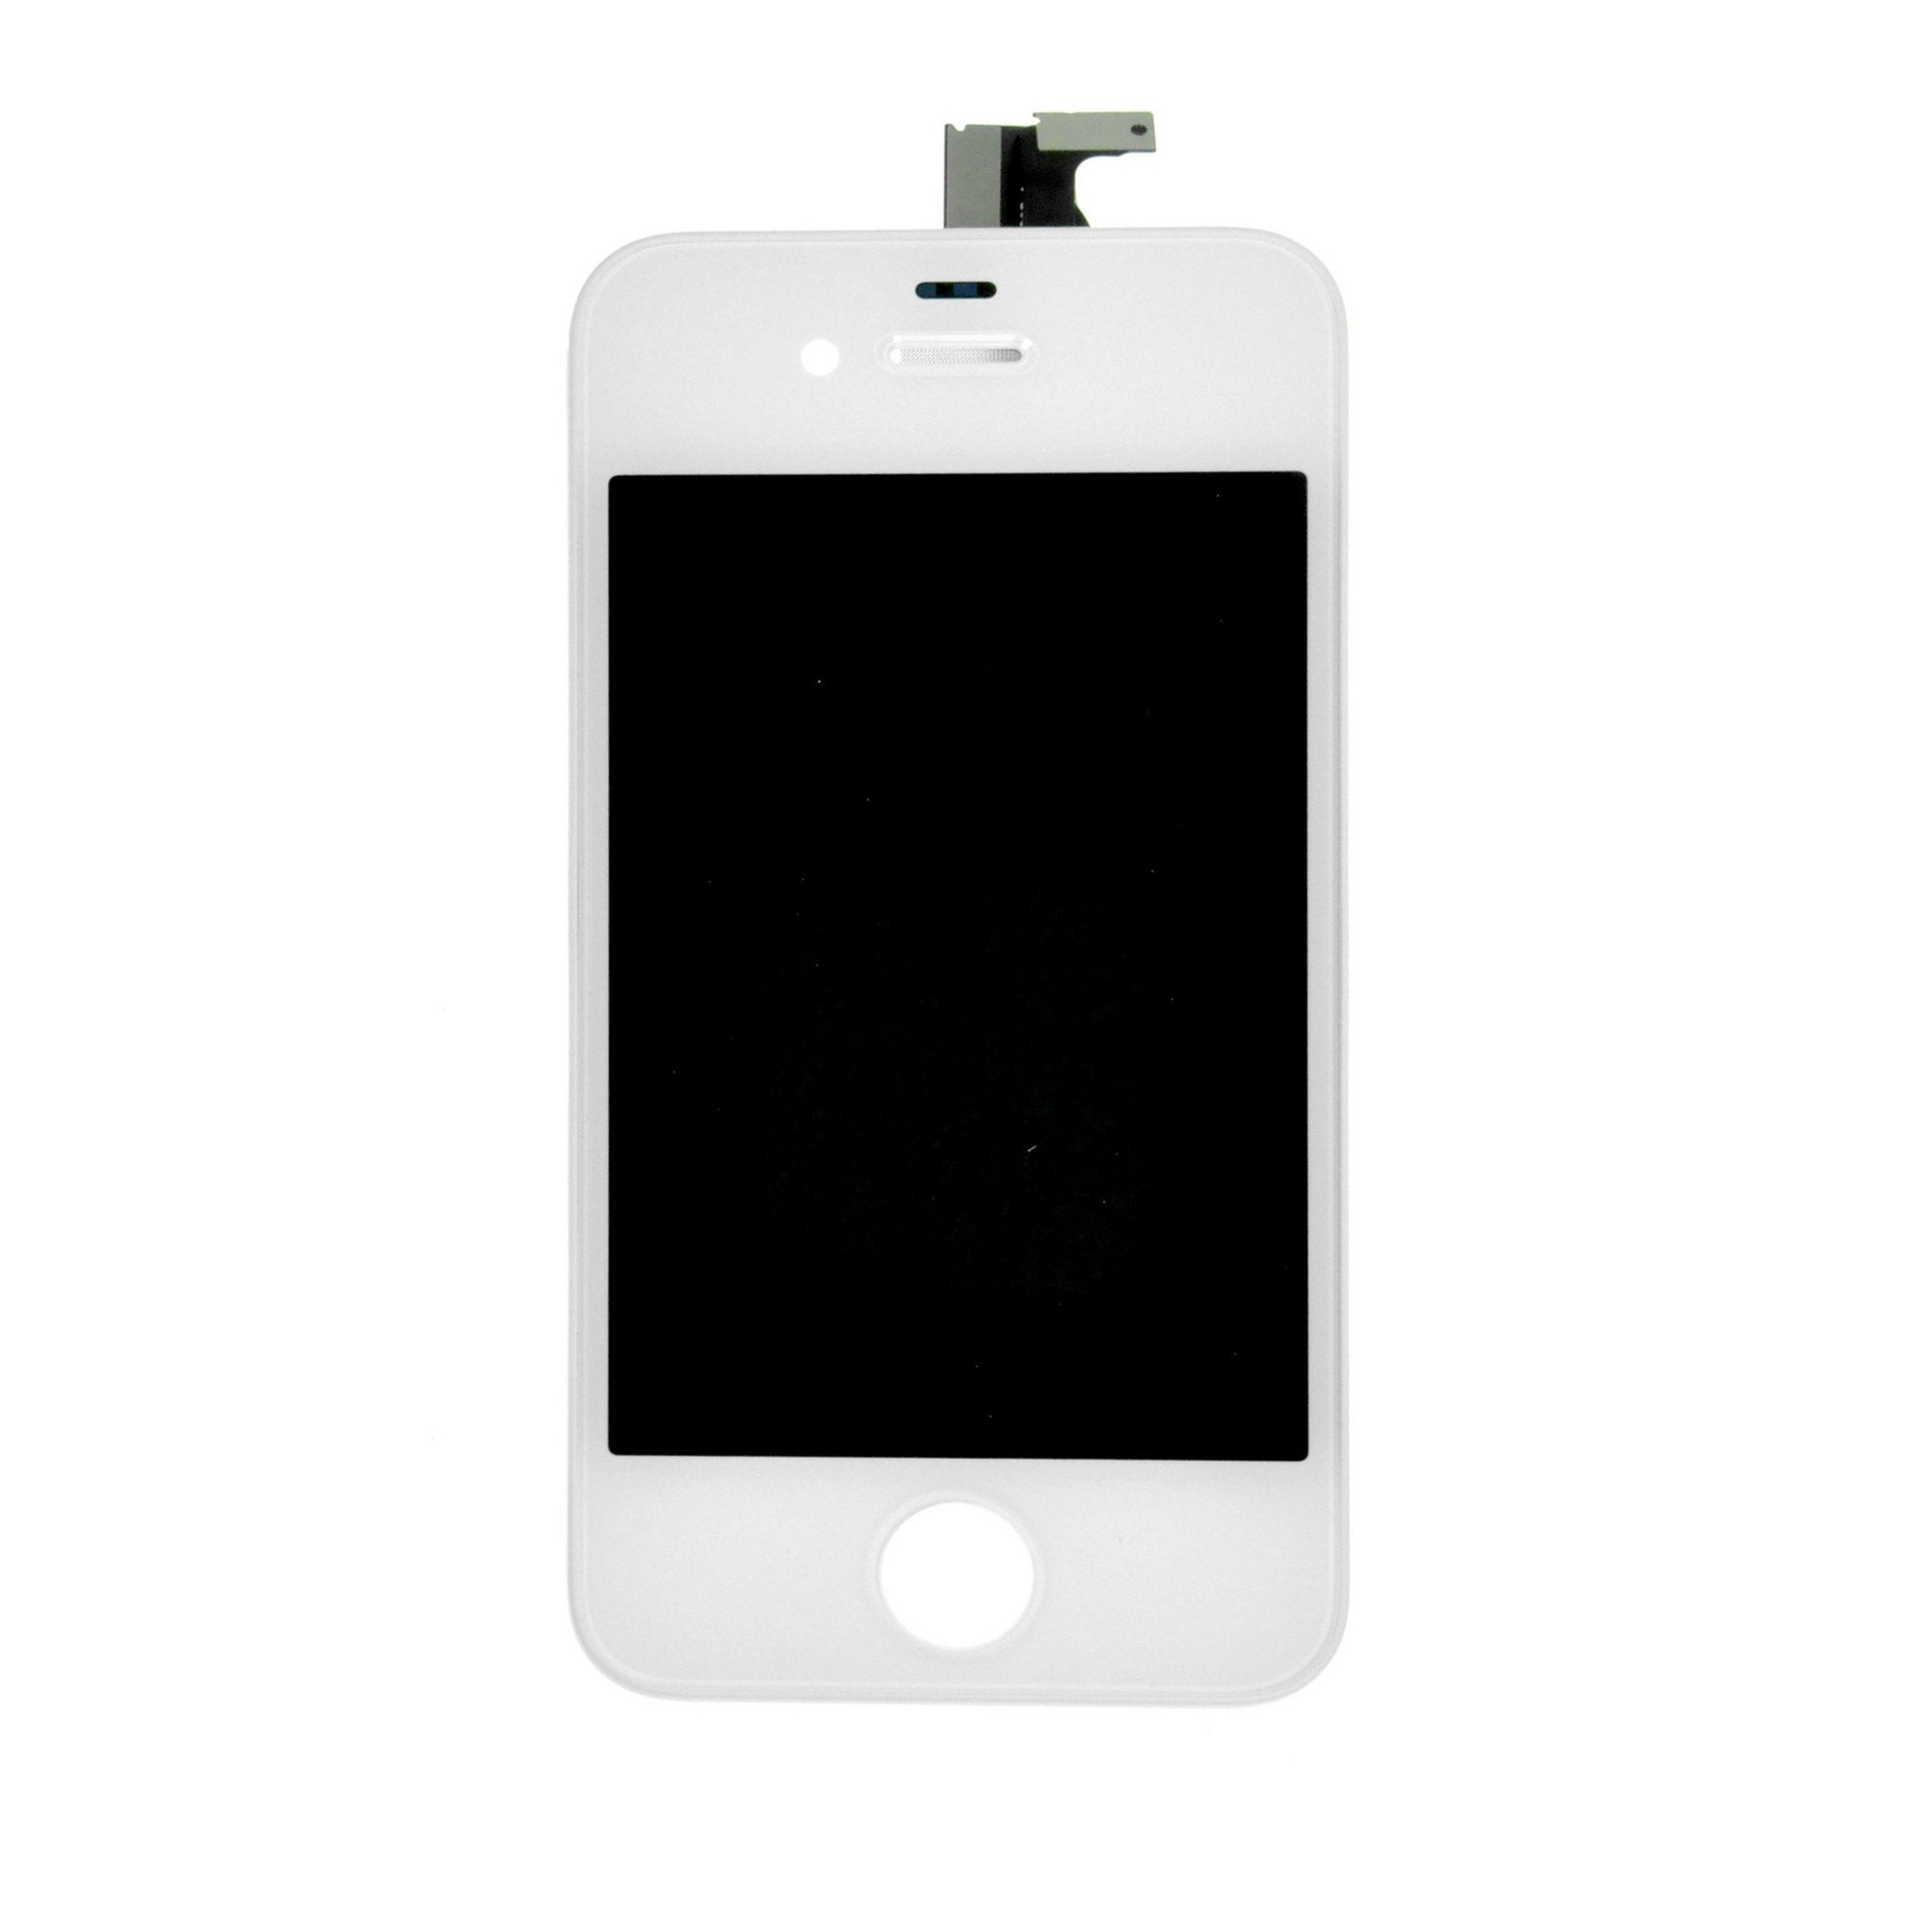 iPhone 4 (GSM/AT&T) Screen White New